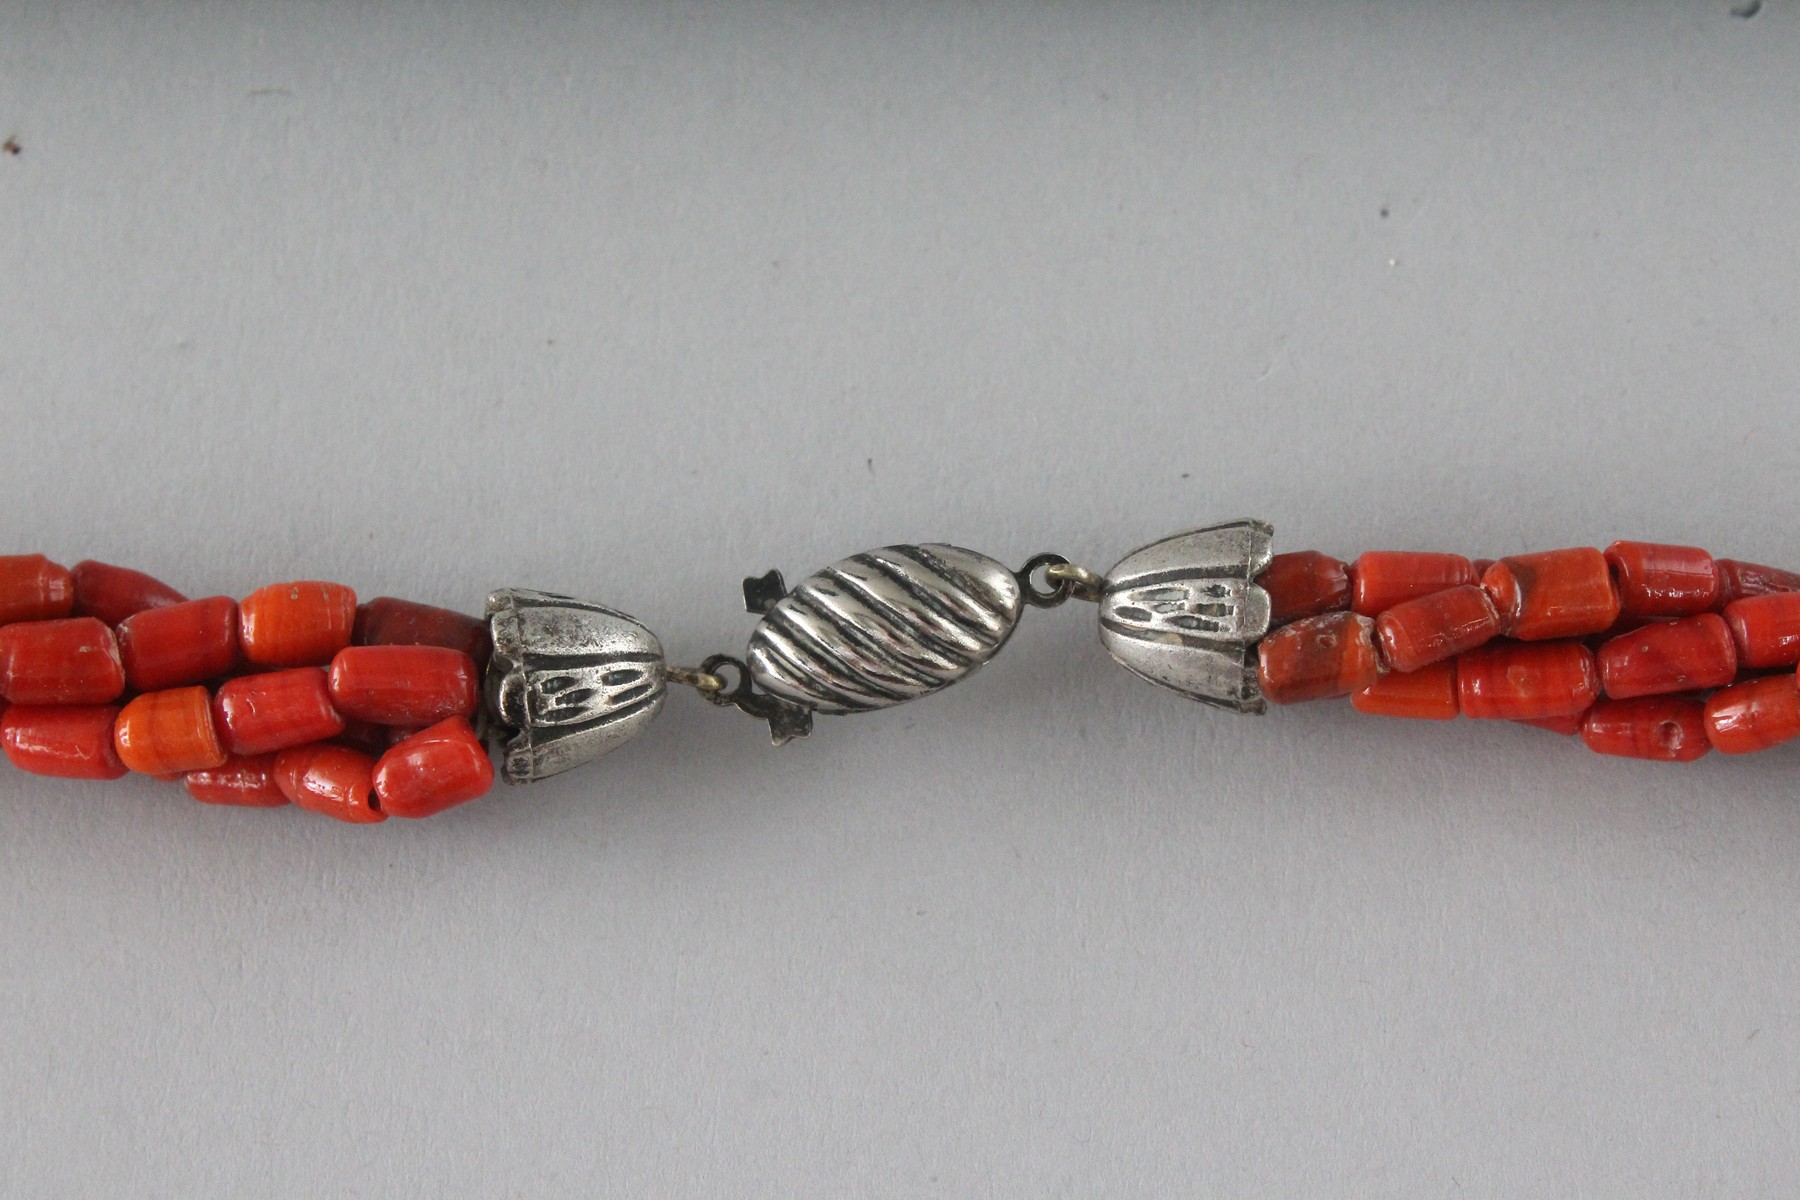 A CORAL NECKLACE. - Image 3 of 3